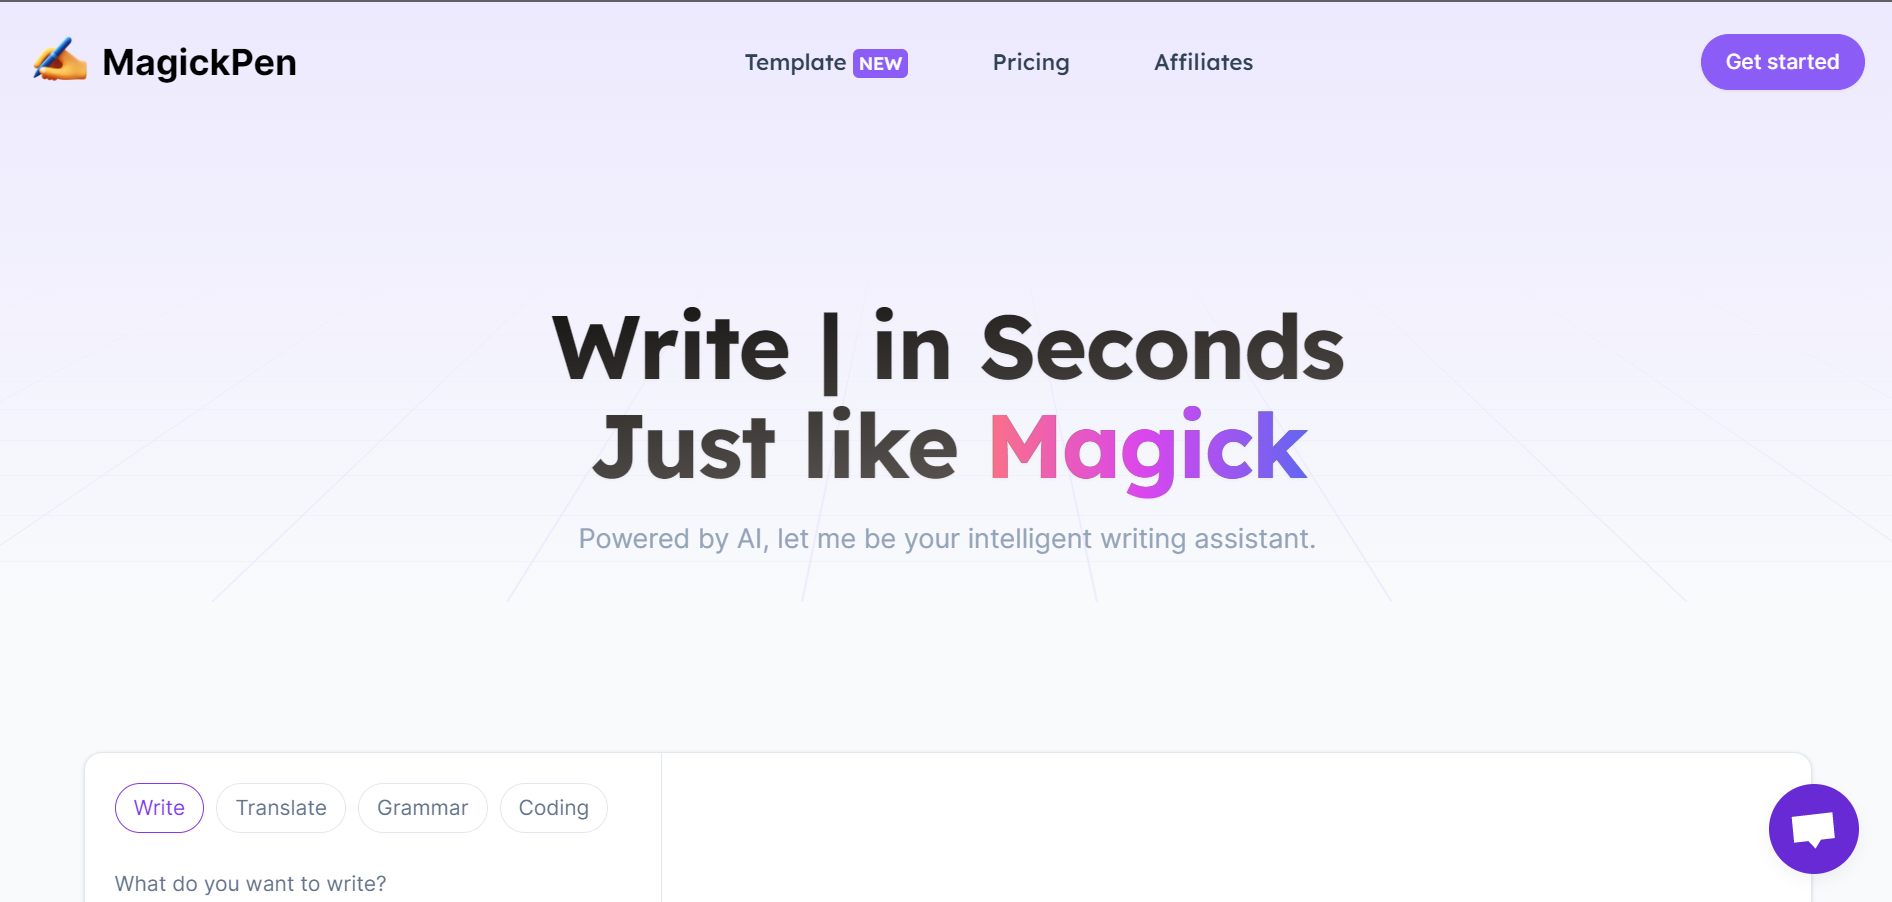 MagickPen.com: The Key to Effortless Writing